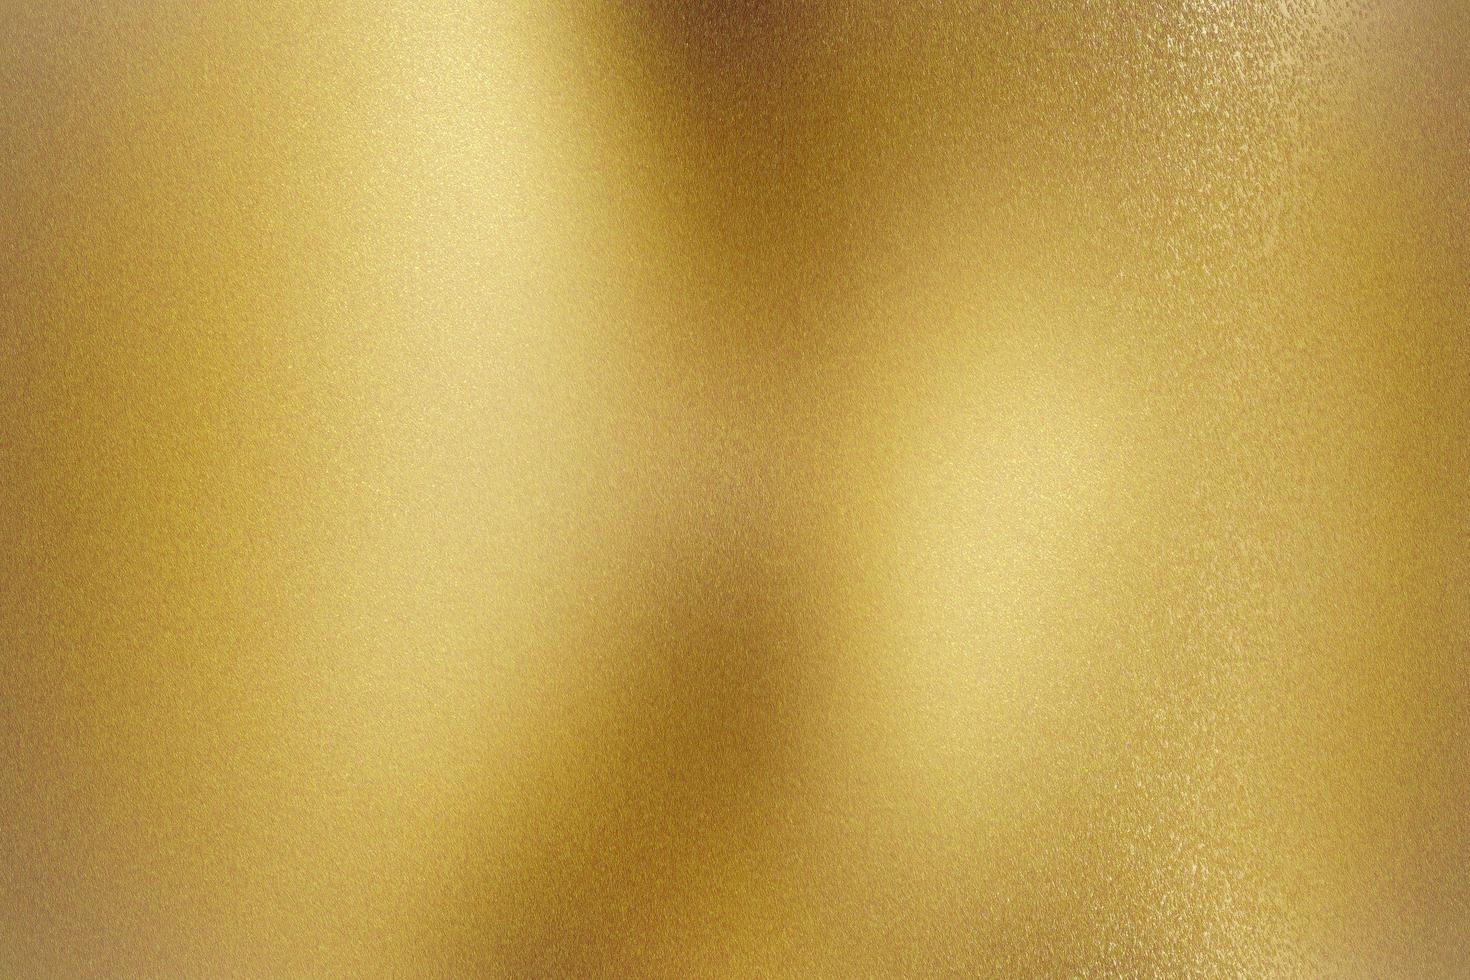 Brushed gold metallic wall with scratched surface, abstract texture background photo